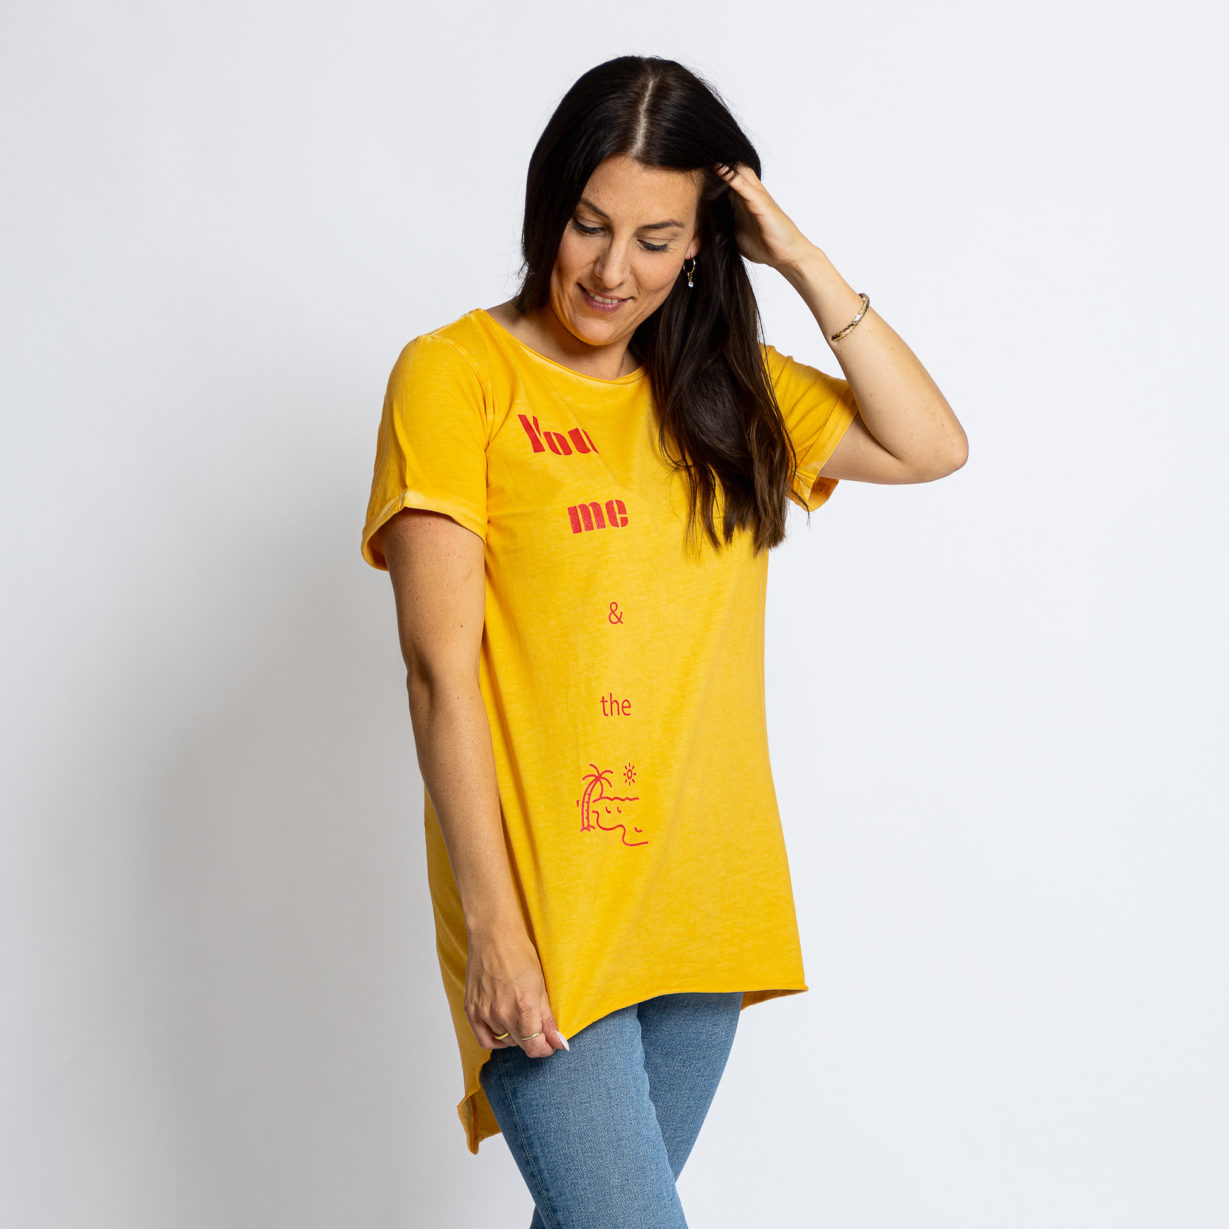 Antonia – Langes T-Shirt You and me Sun